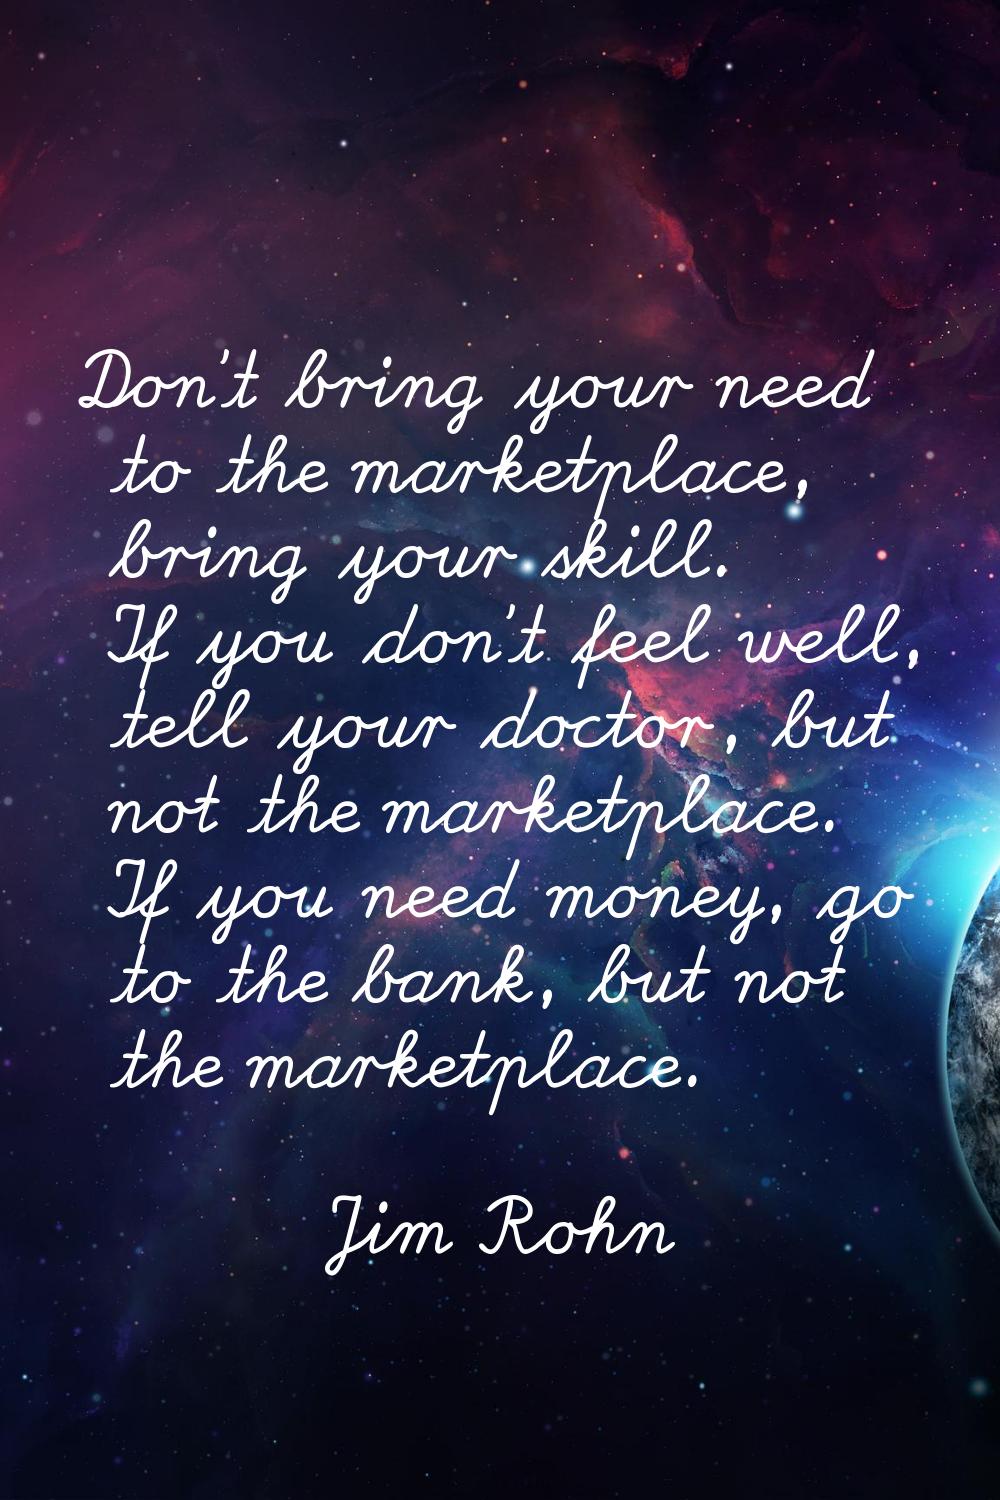 Don't bring your need to the marketplace, bring your skill. If you don't feel well, tell your docto